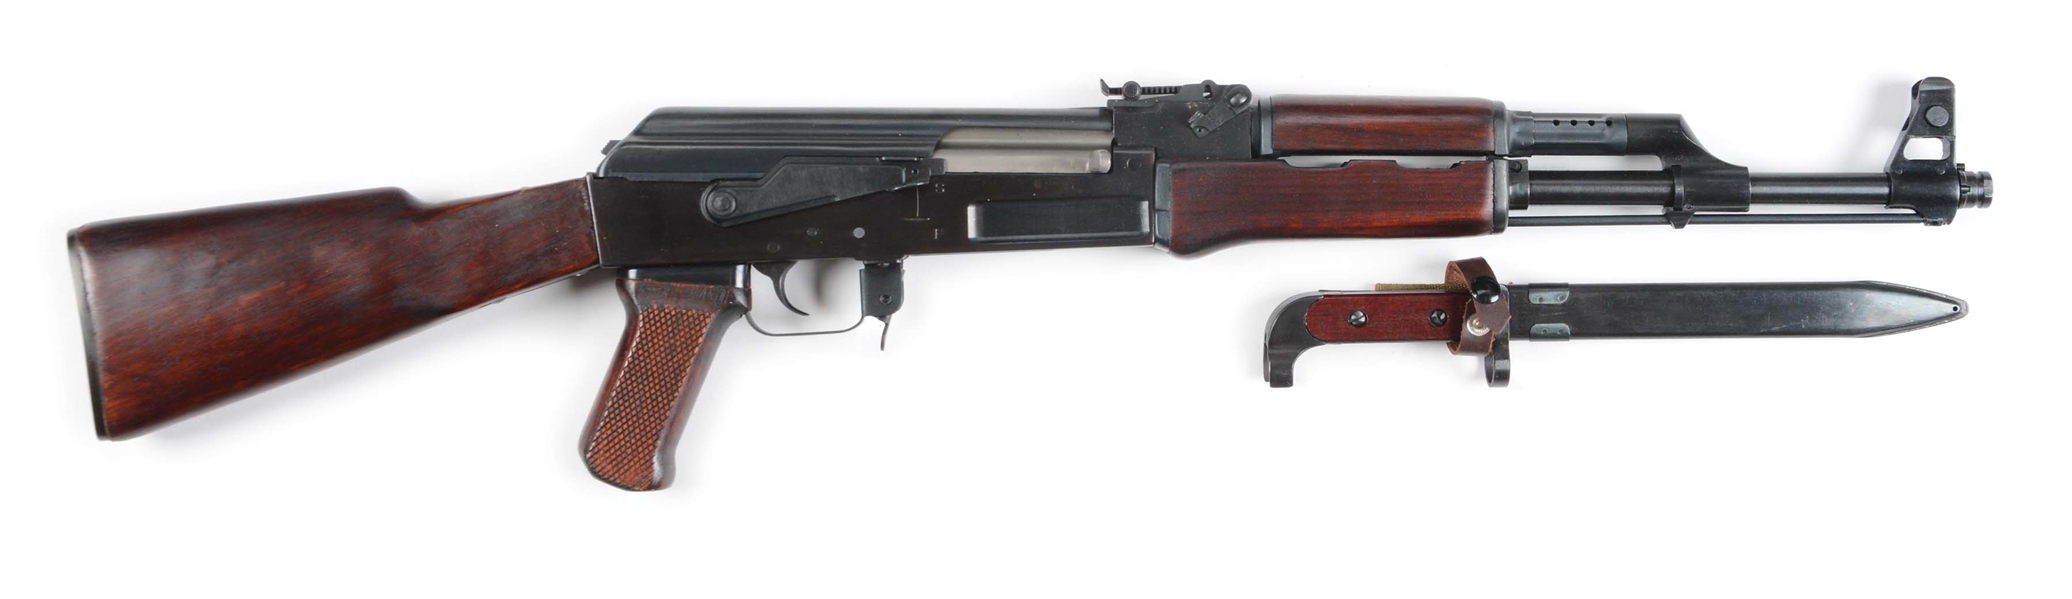 (M) EXTREMELY DIFFICULT TO FIND NEW IN ORIGINAL BOX EARLY LOW NUMBERED LEGEND SERIES AK-47/S SEMI AUTO RIFLE 